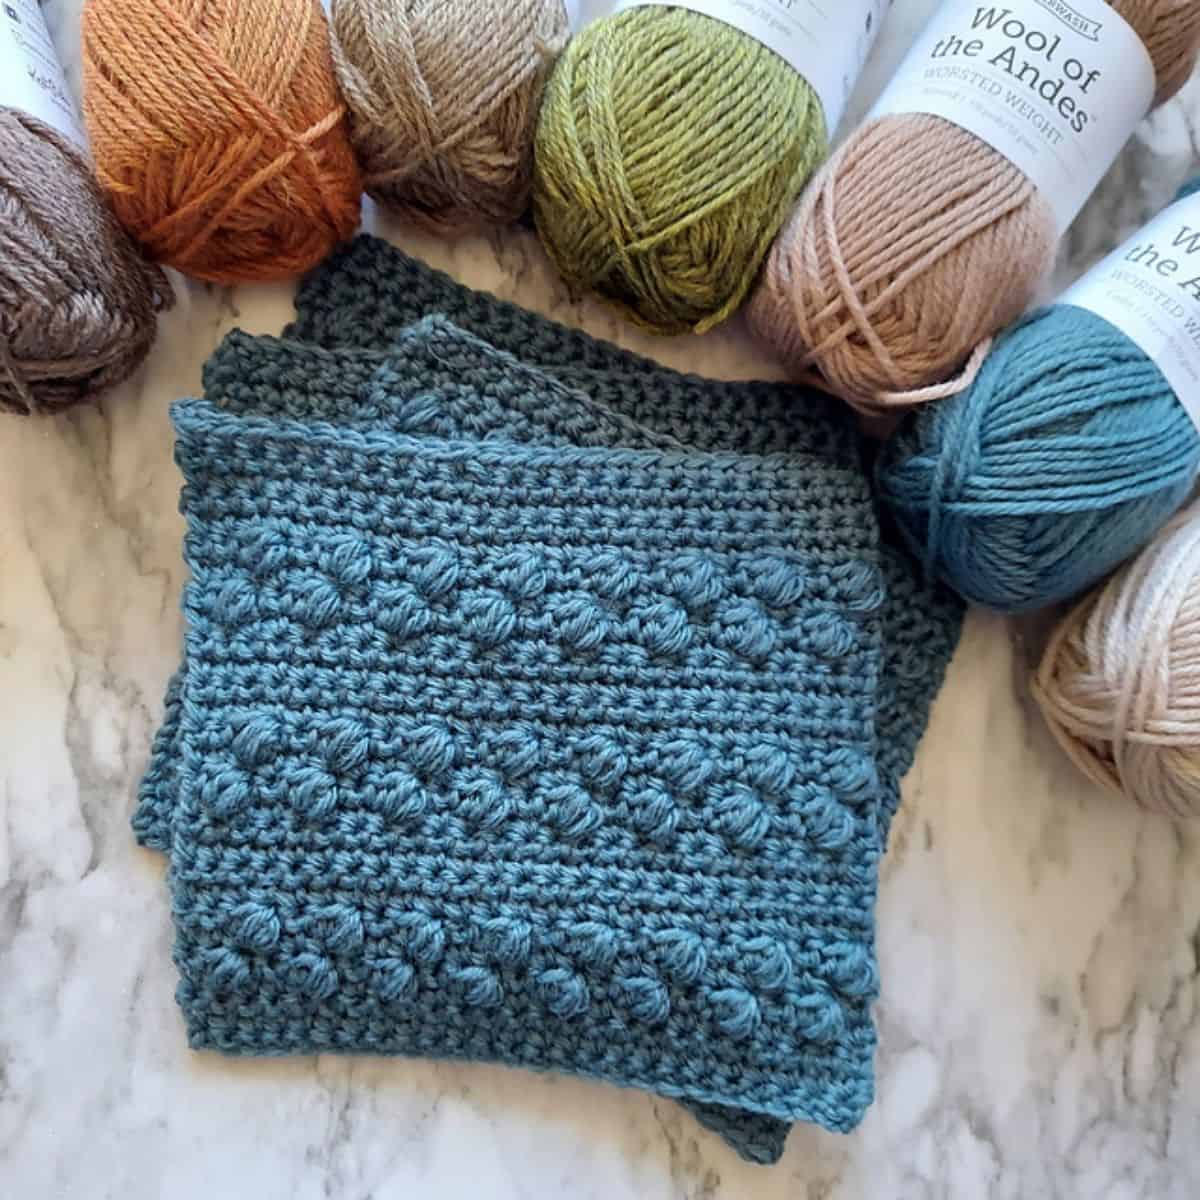 solid granny squares with skeins of yarn surrounding them